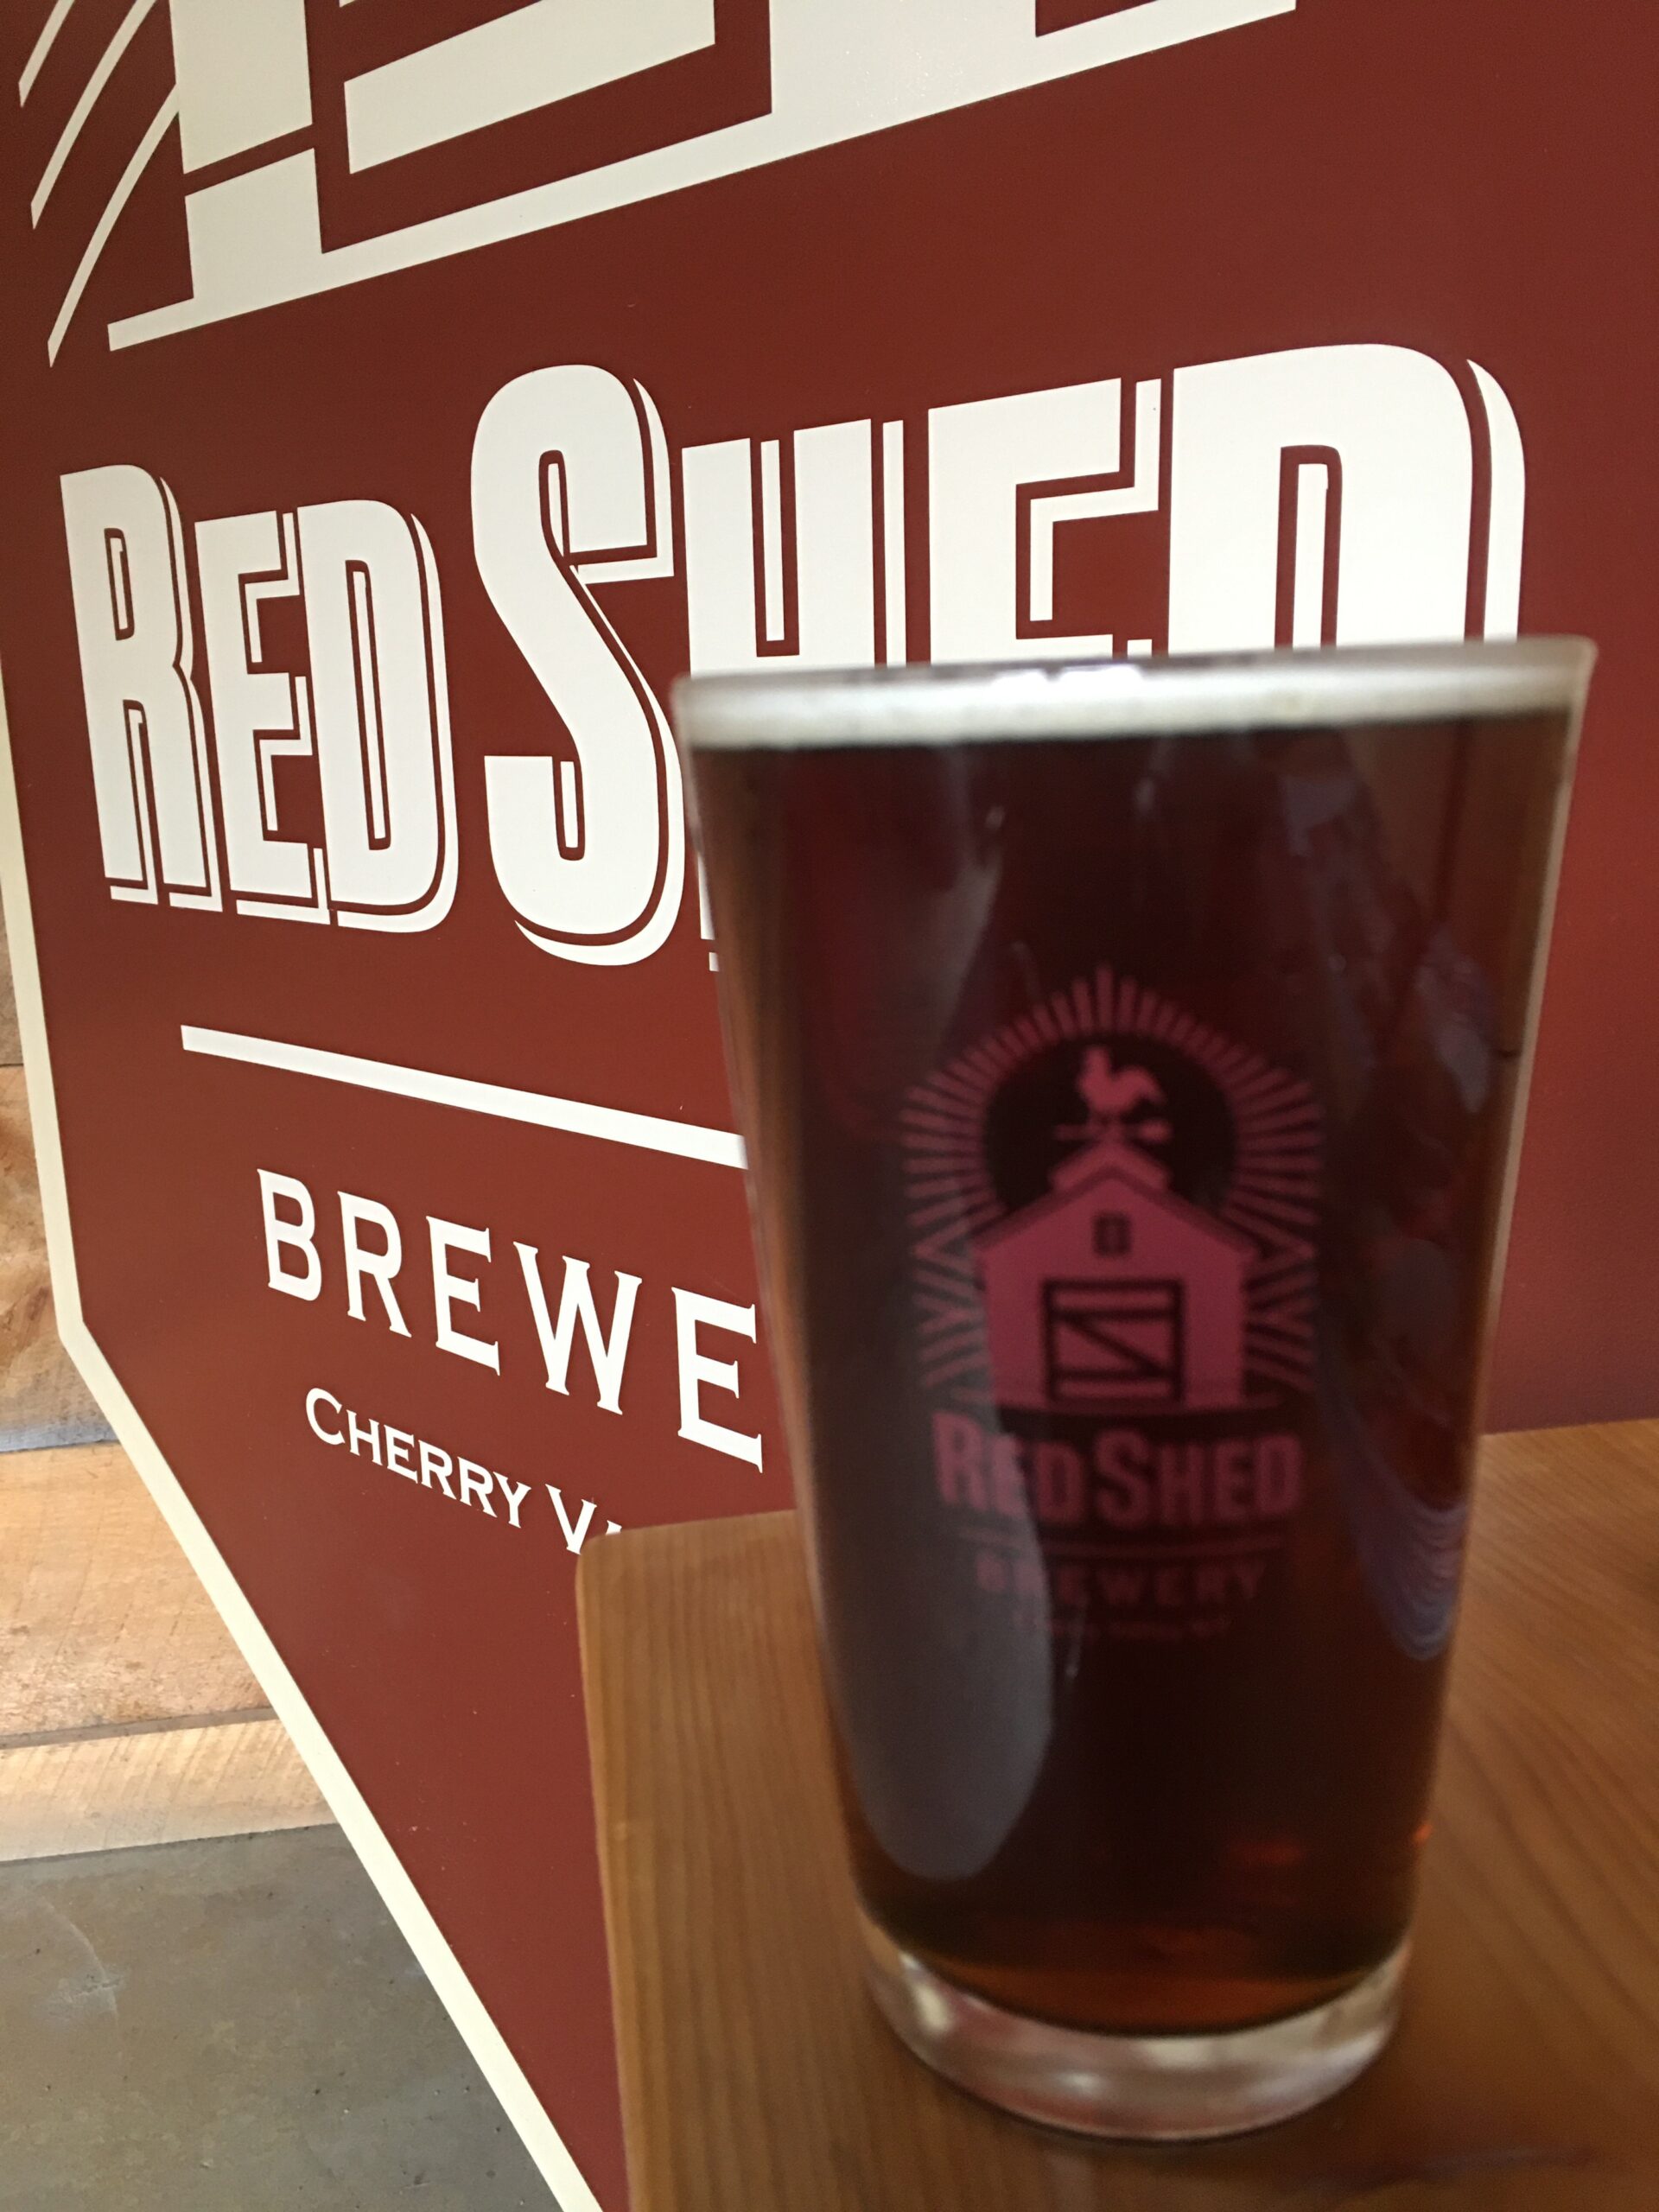 The Local Dark English Mild, Red Shed Brewing